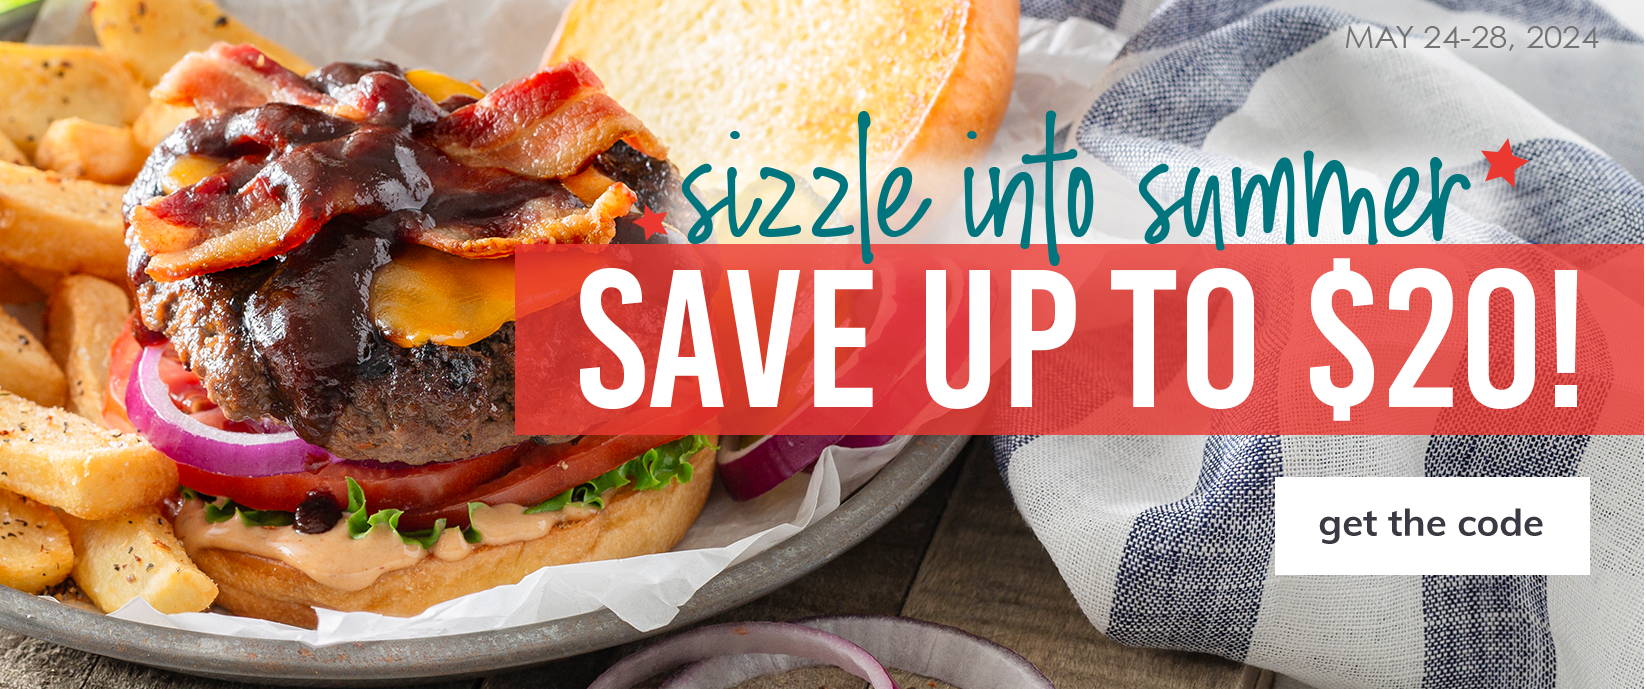 sizzle into summer | save up to $20! | get the code